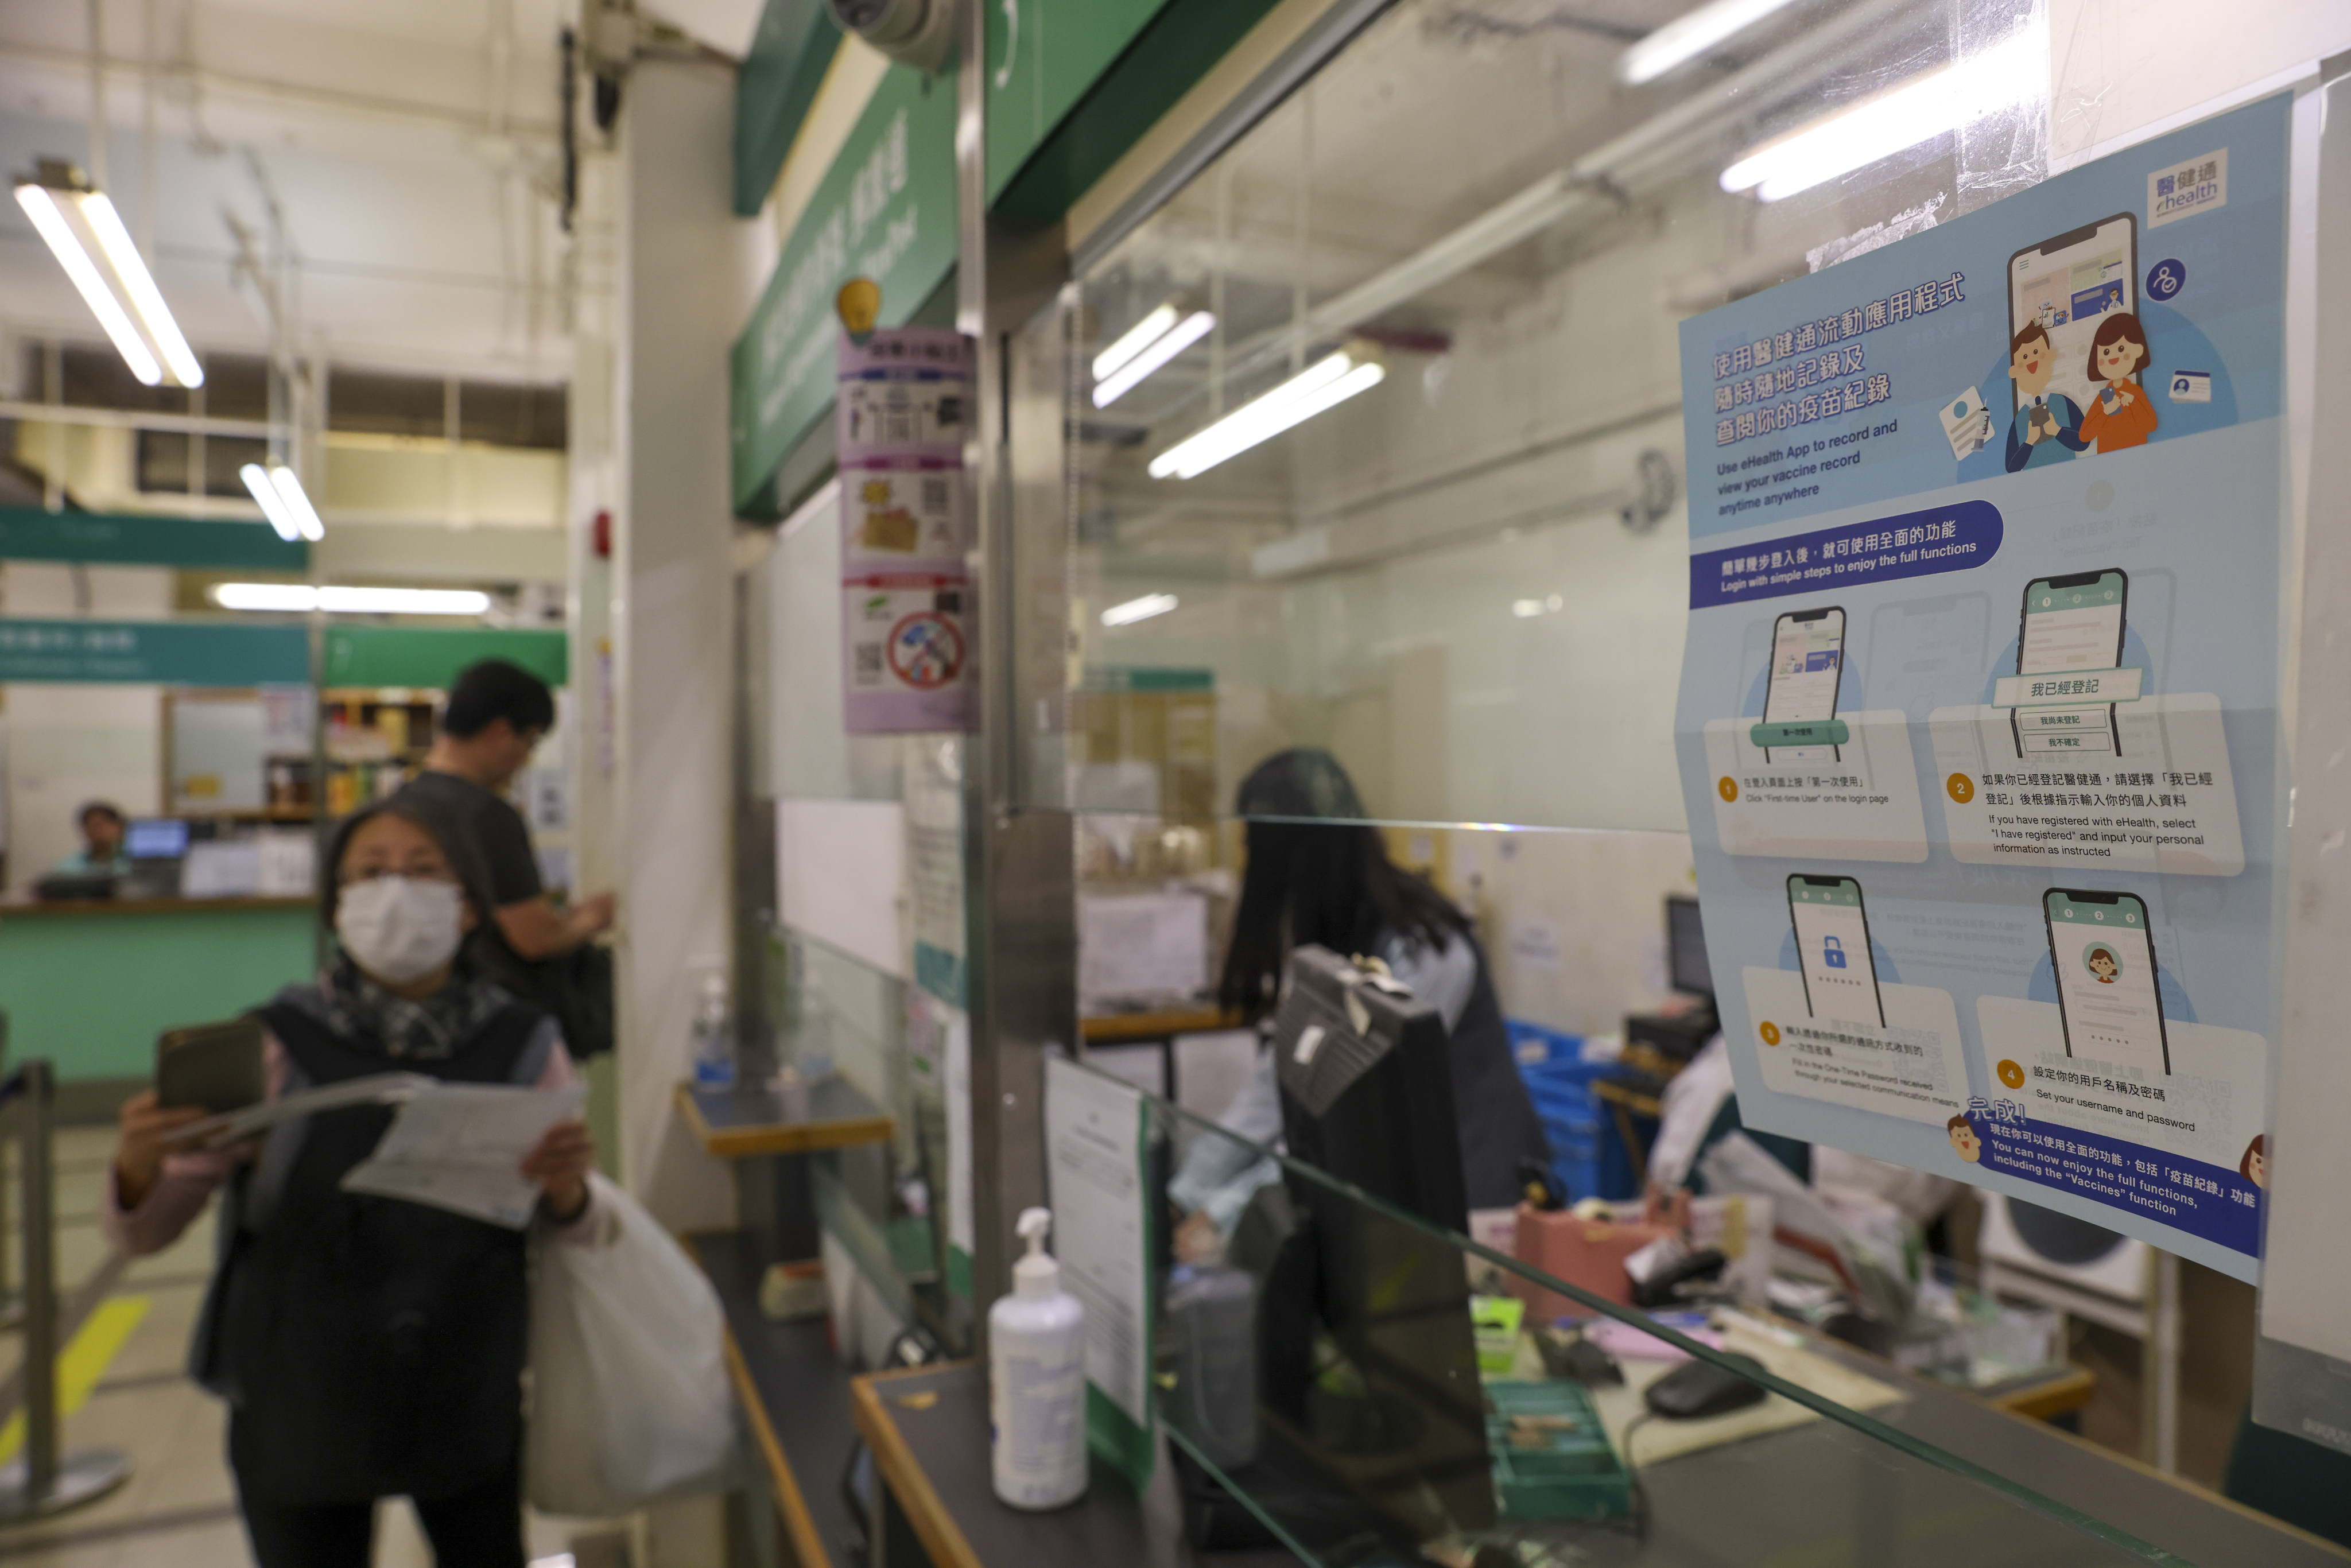 An eHealth registration note is displayed at a post office in Sham Shui Po. Photo: Yik Yeung-man